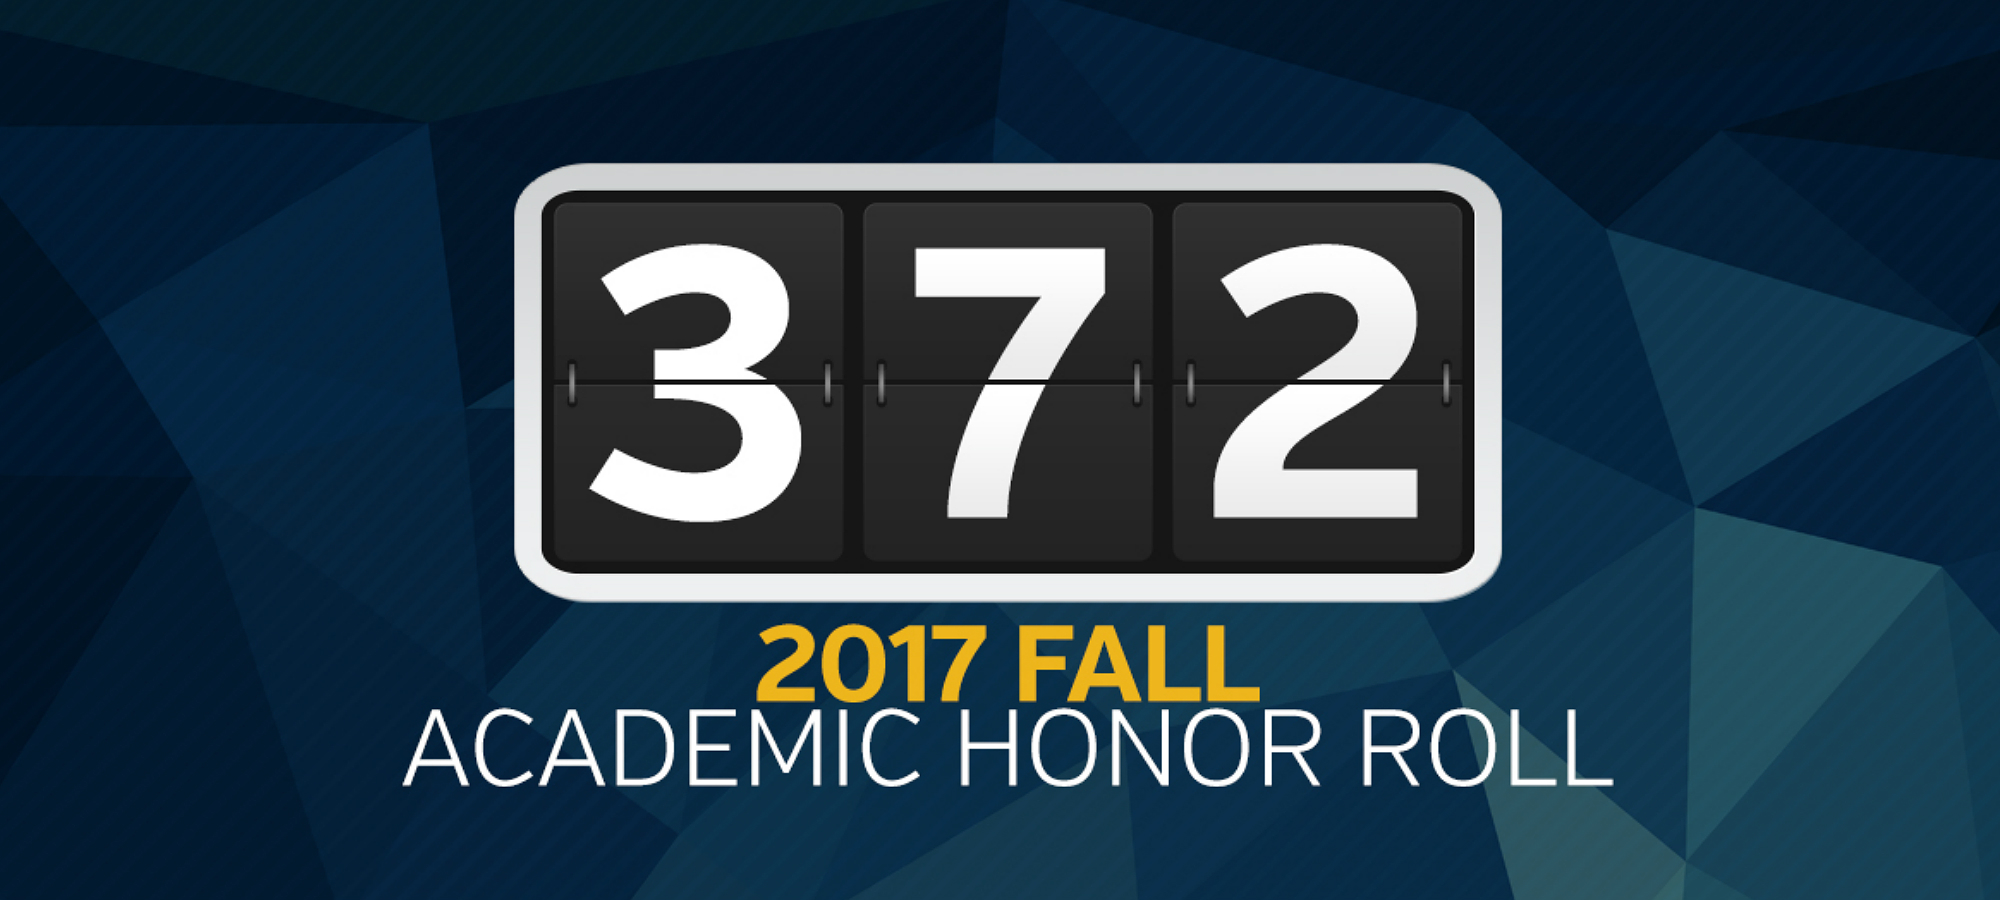 Dallas boasts 53 Student-Athletes on SCAC 2017 Fall Academic Honor Roll